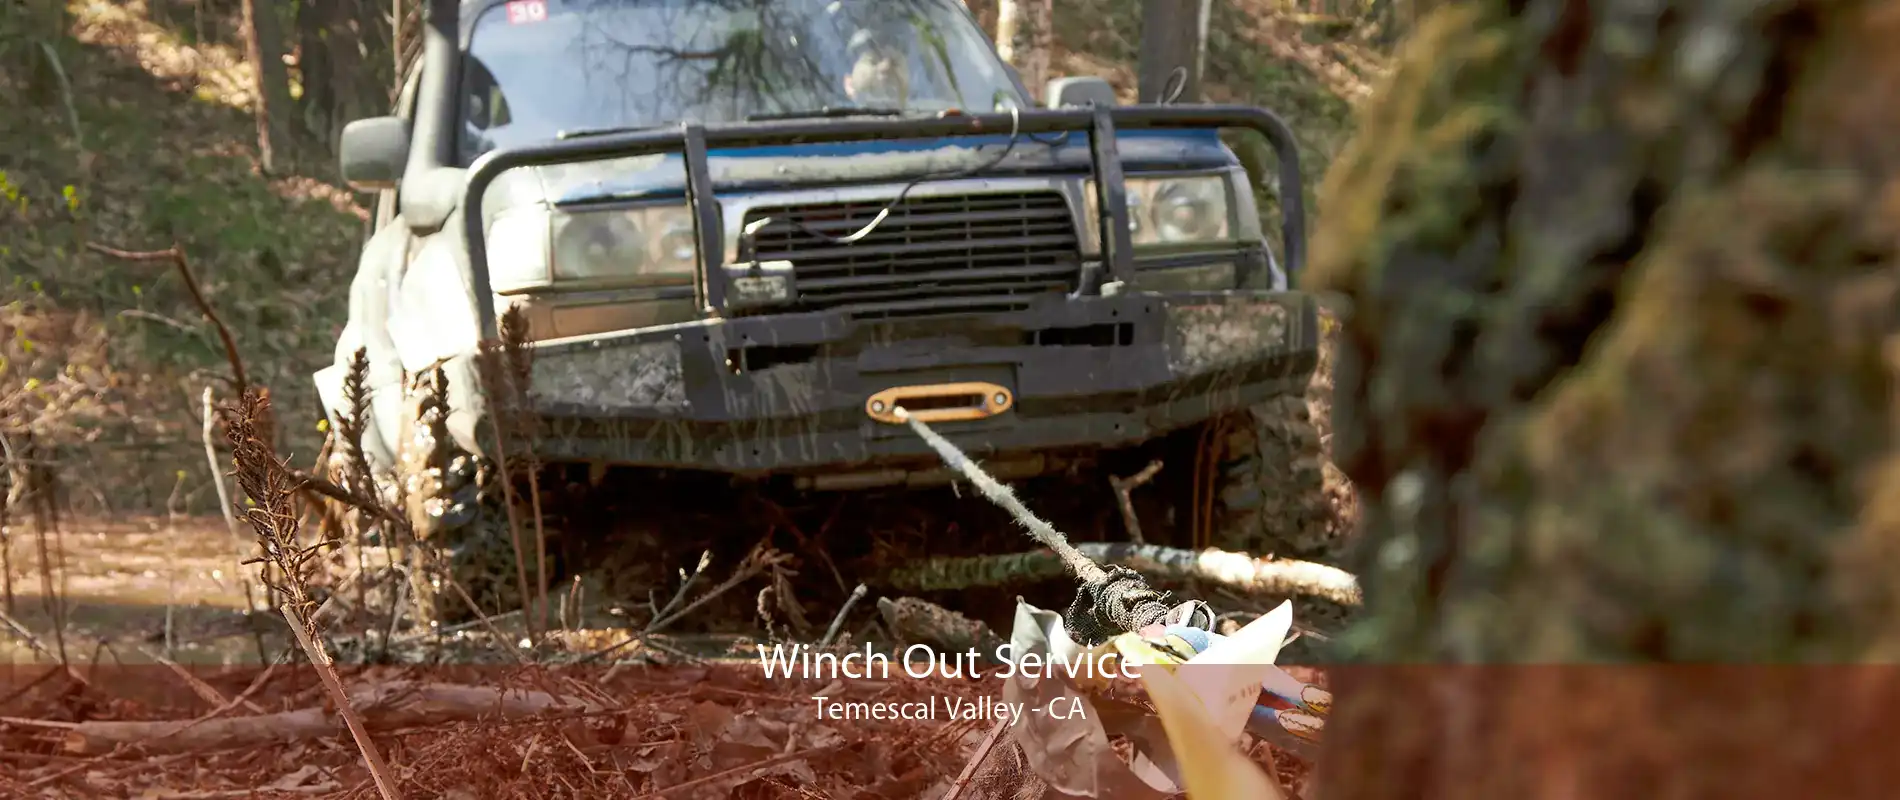 Winch Out Service Temescal Valley - CA